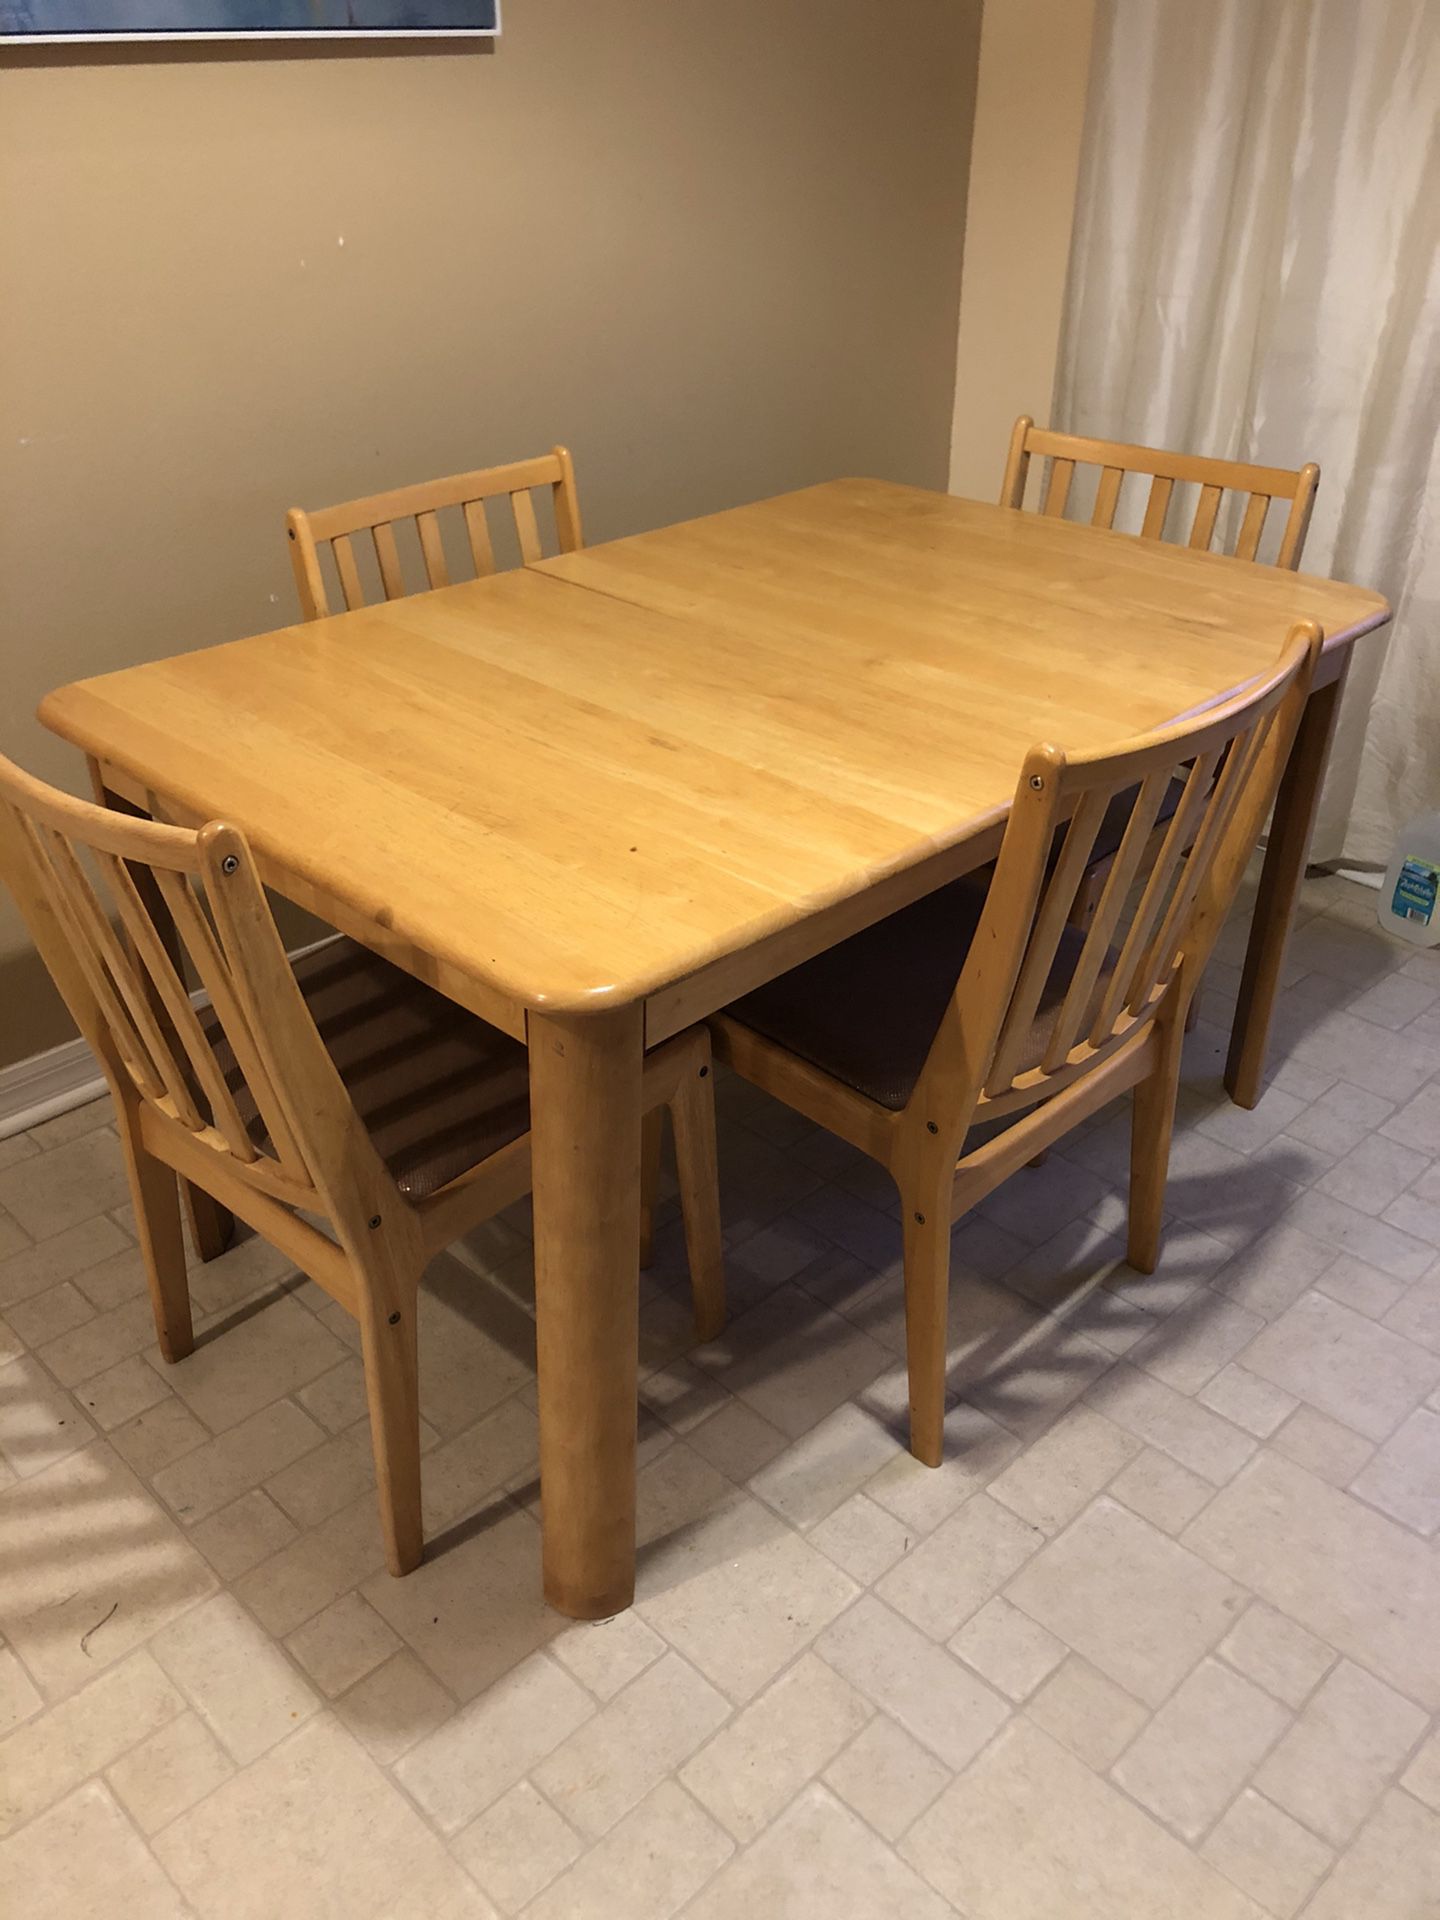 Dining room set with attached insert